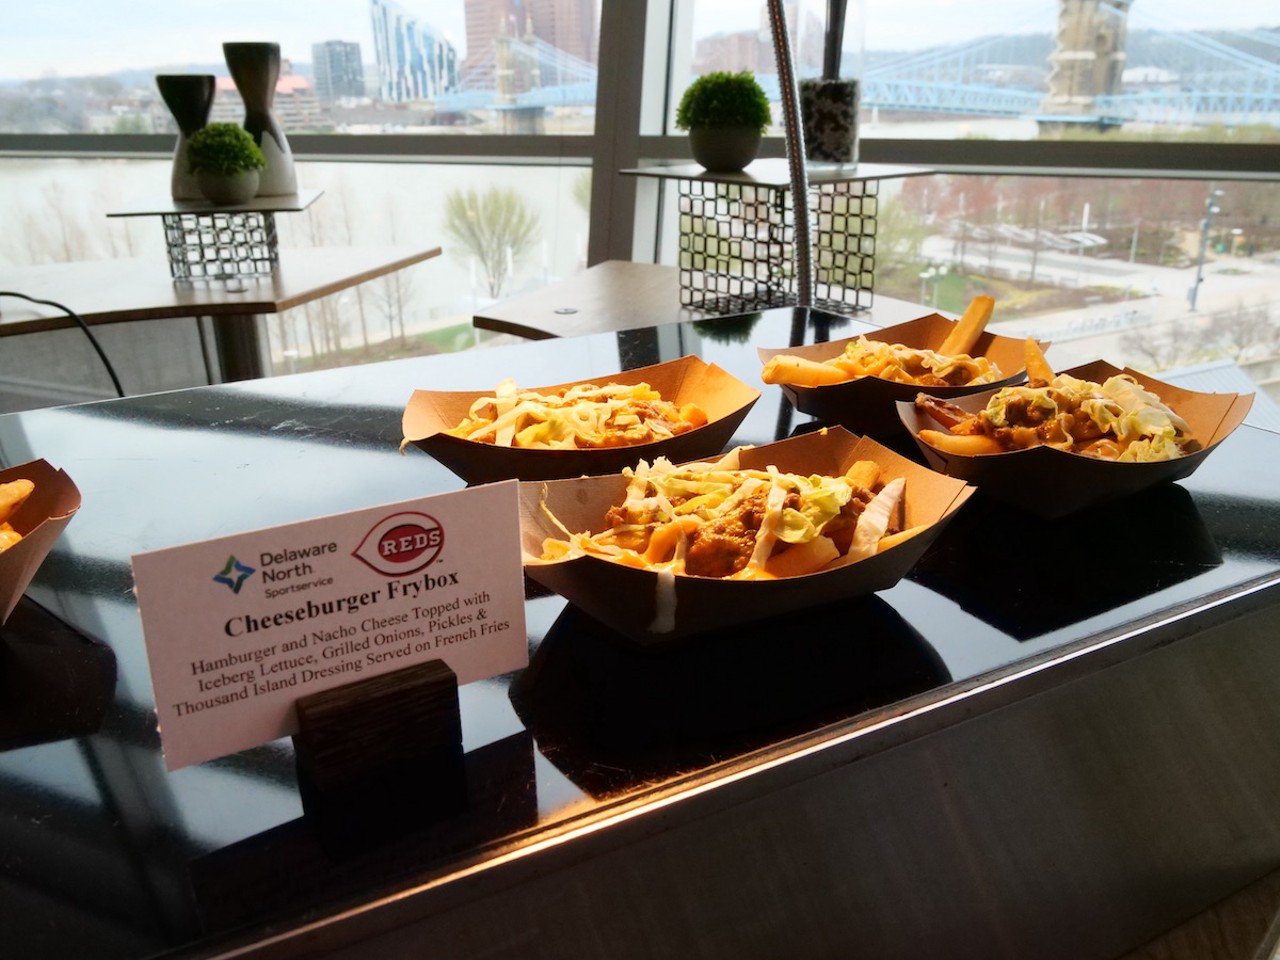 The Reds introduce new food options at Great American Ball Park on March 23, 2023, ahead of the Cincinnati Reds' 2023 season. A cheeseburger frybox is on the menu.